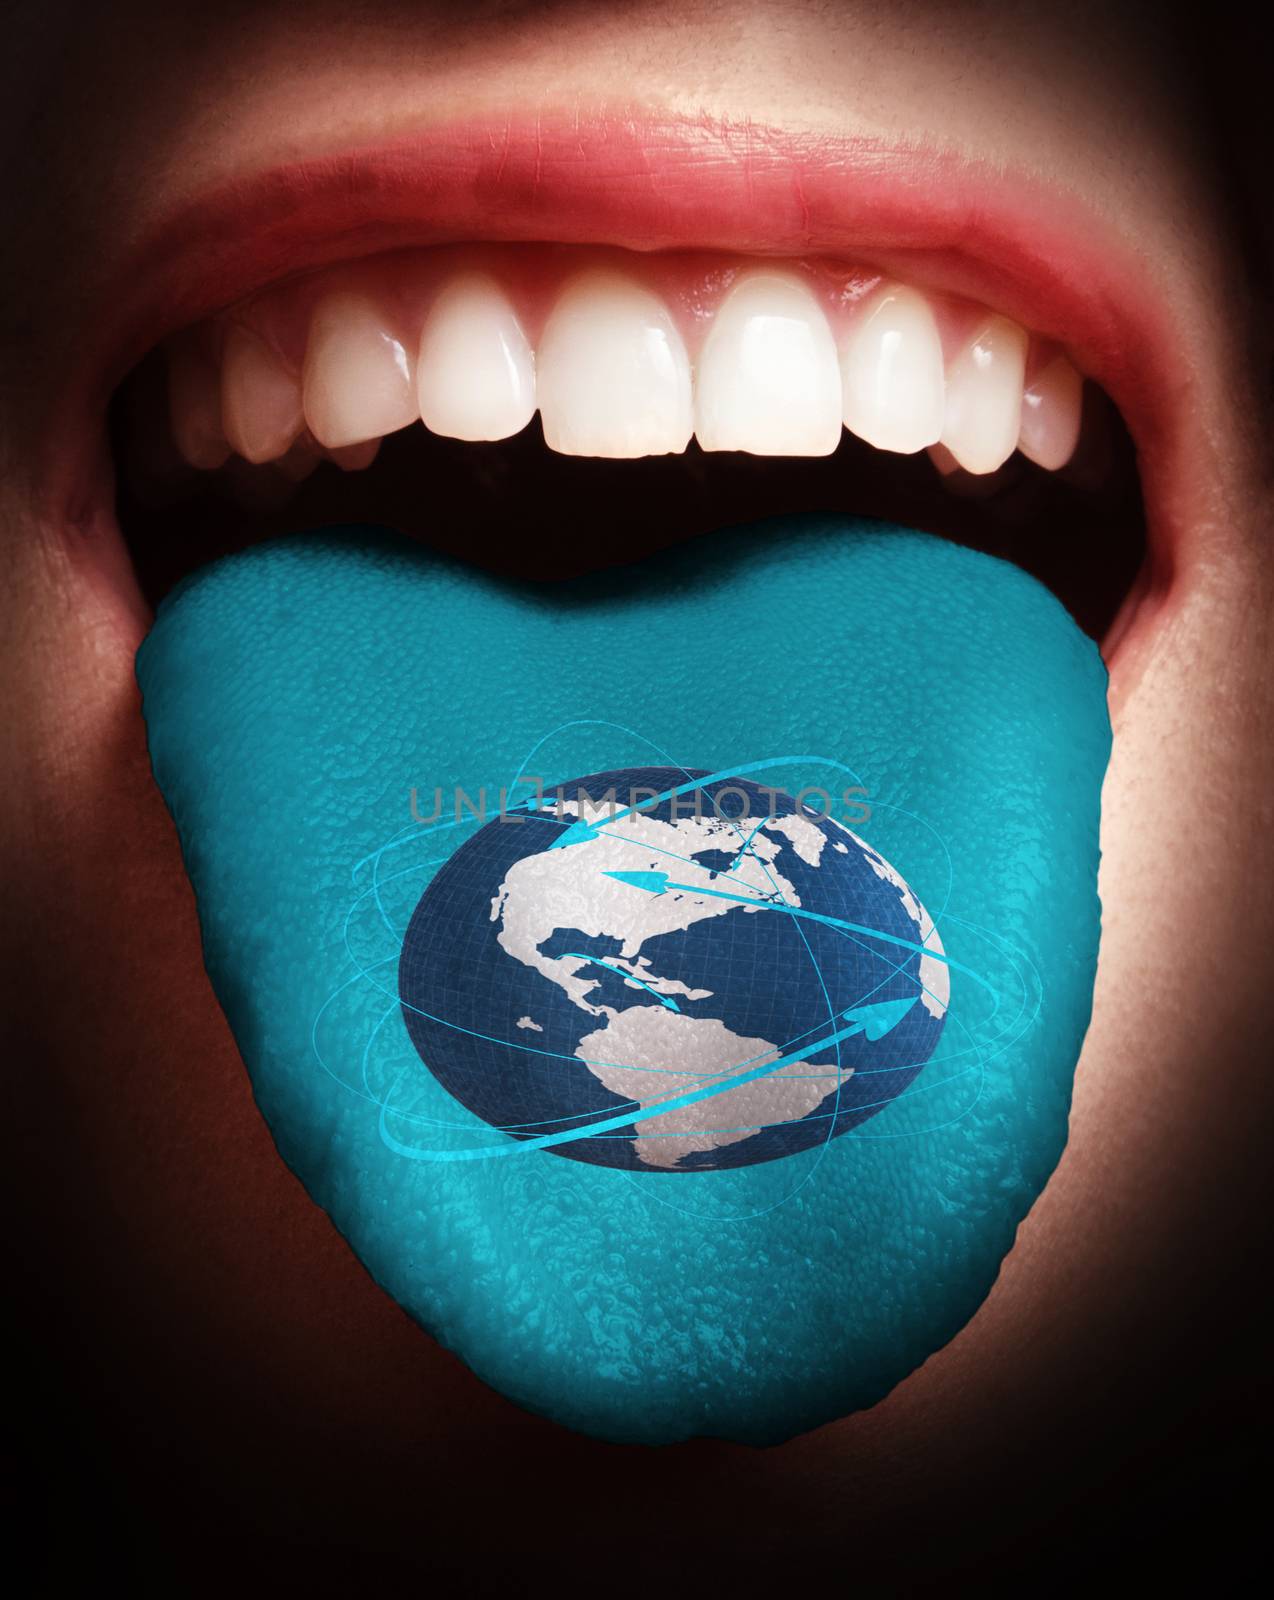 woman with open mouth spreading tongue colored in social network as concept